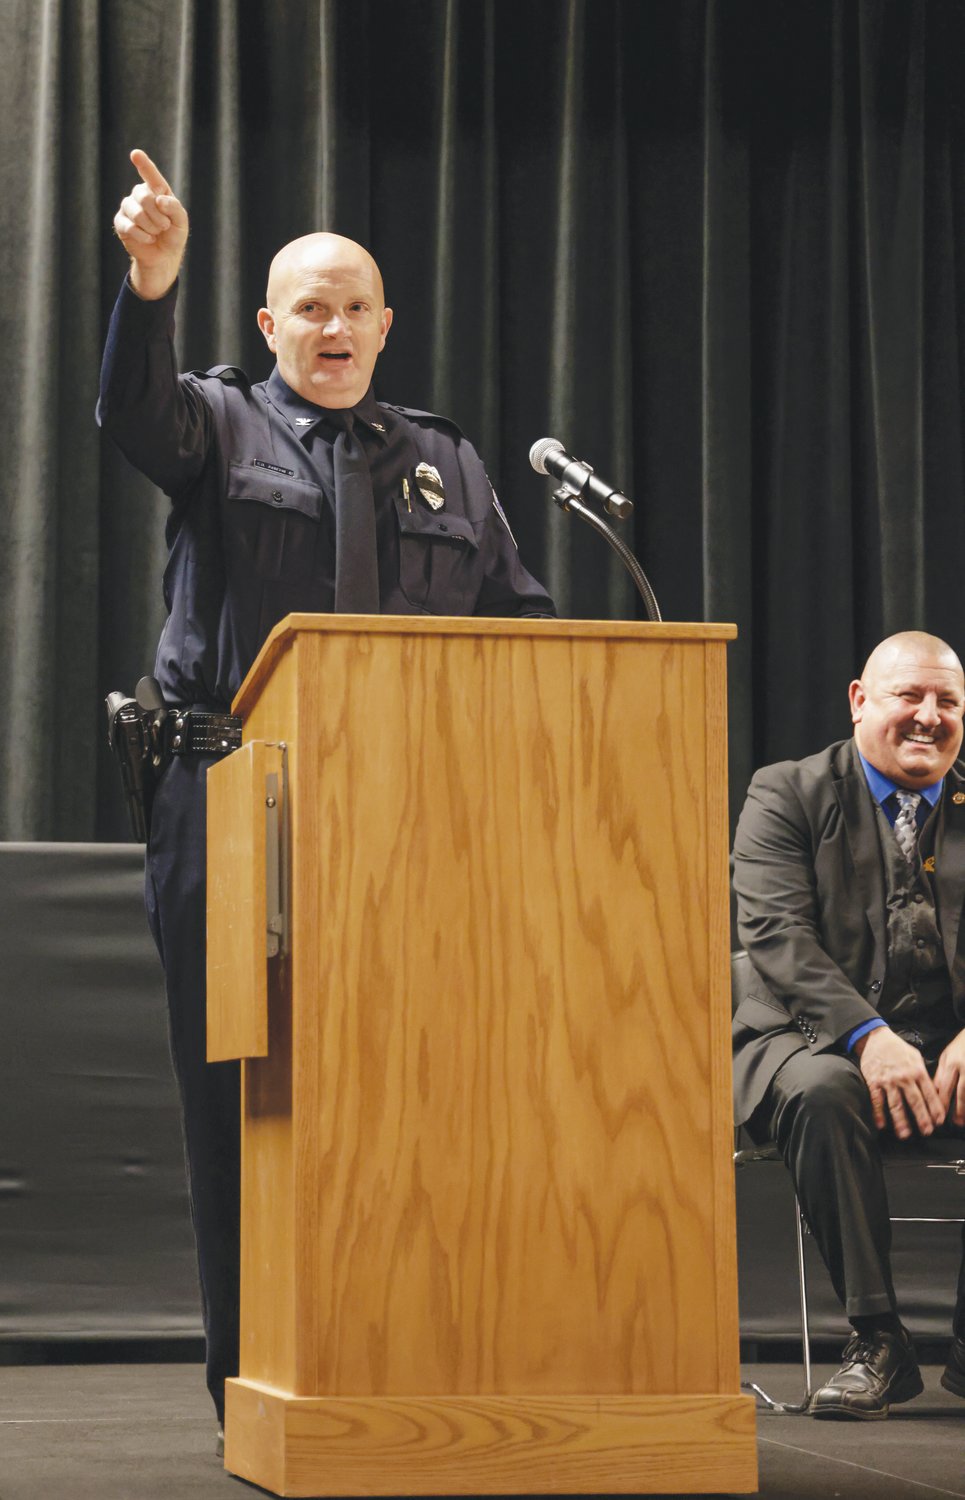 Pittsboro Police Chief Shorty Johnson gave the farewell address at Wednesday's Police Remembrance Week event.